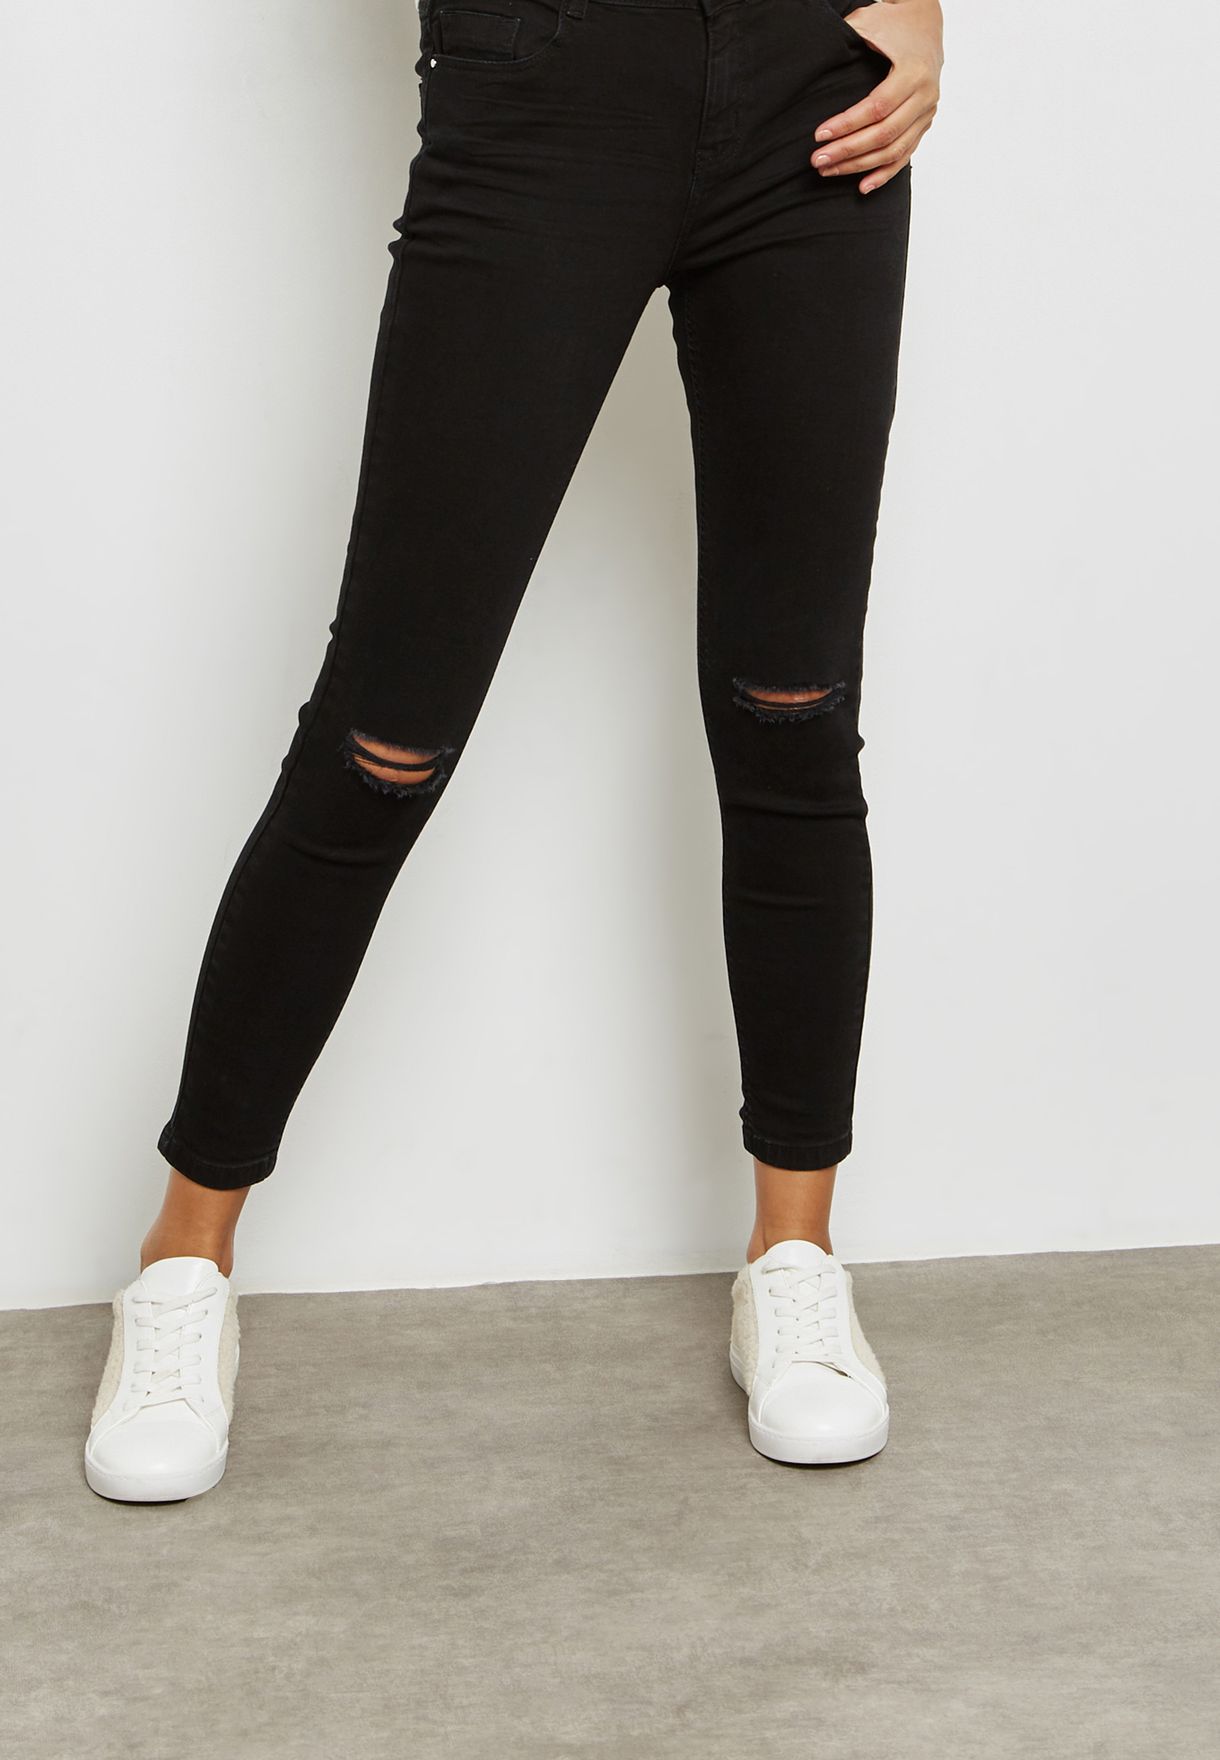 dorothy perkins ripped jeans